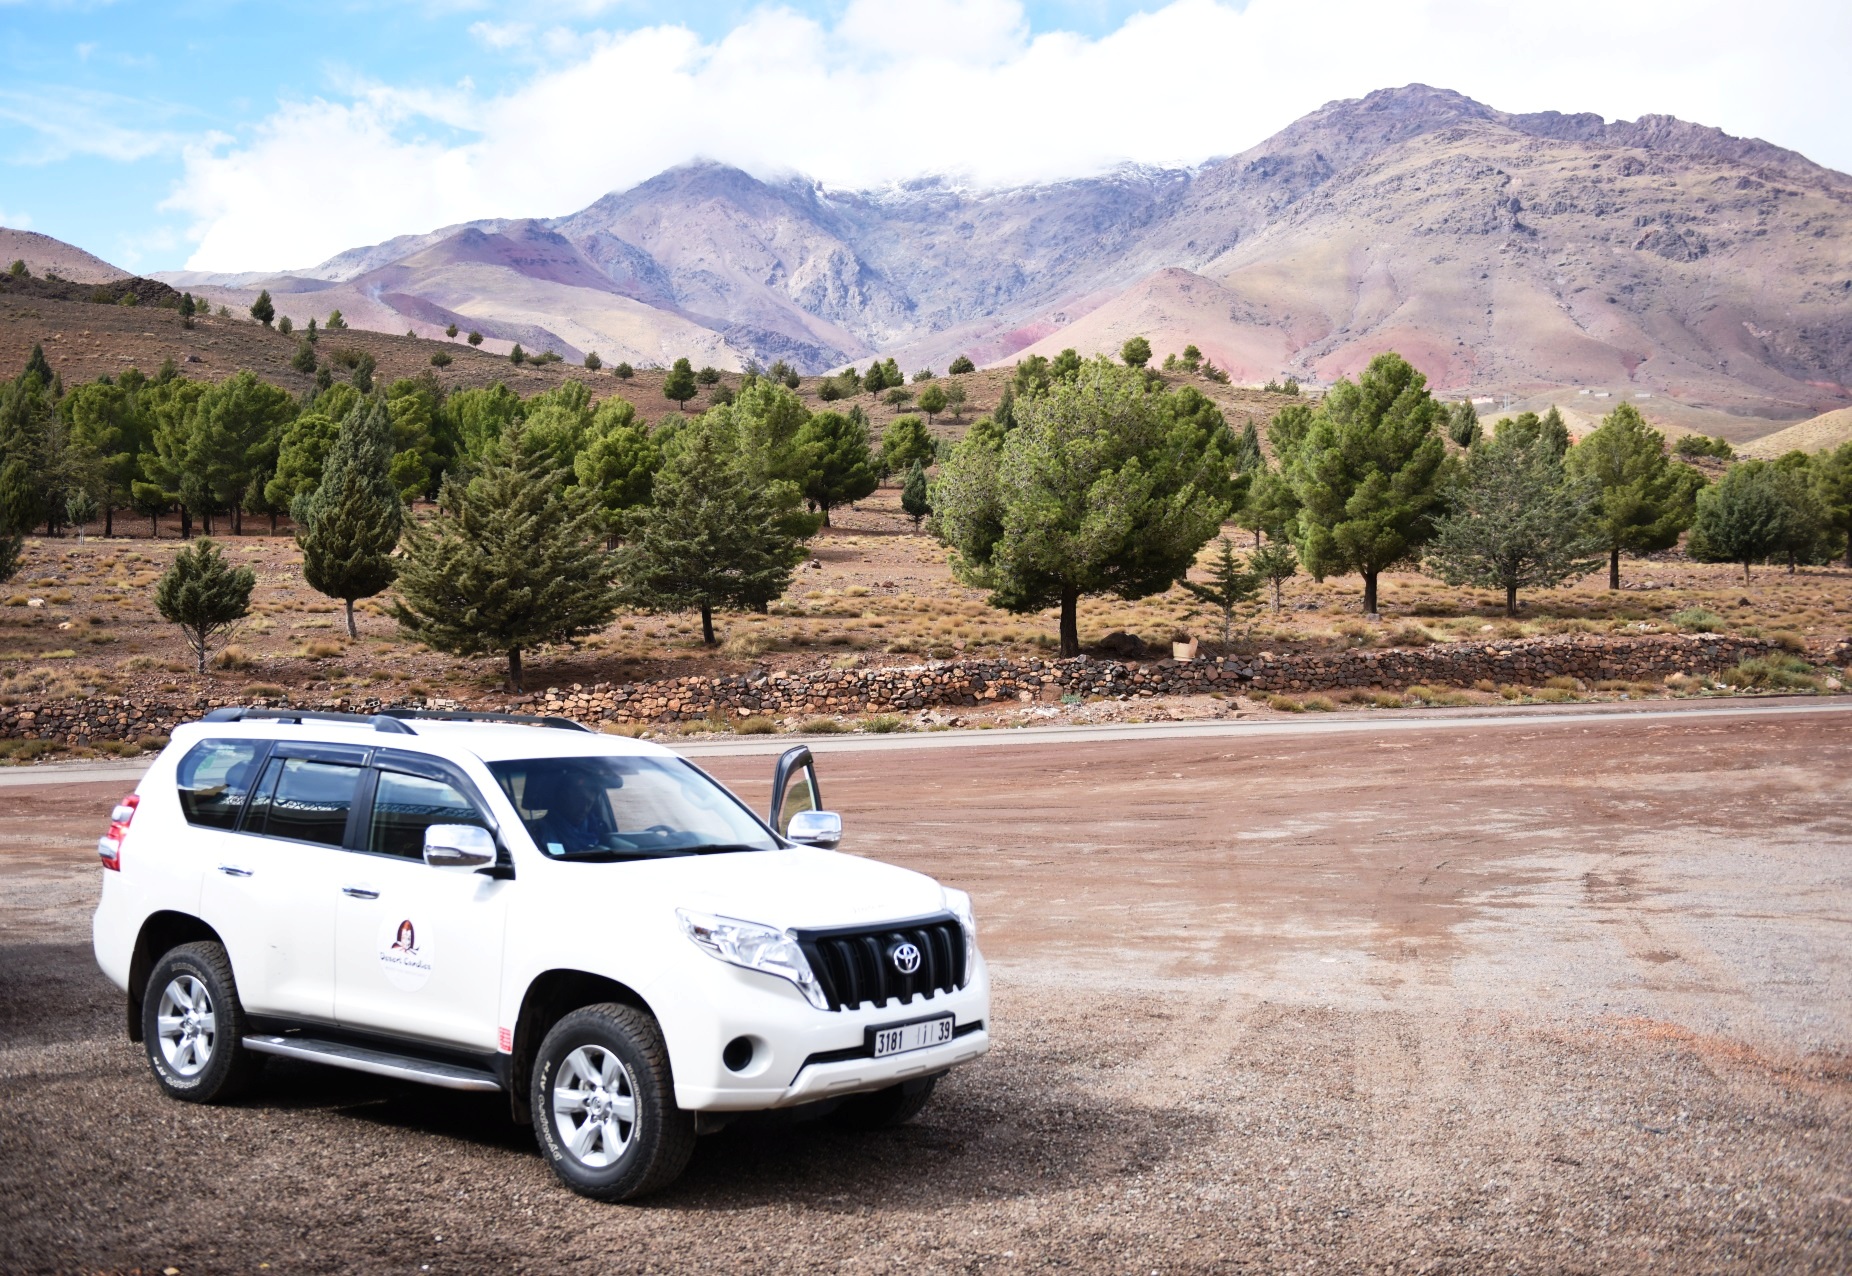 11 days Morocco 4x4 Jeep safari tour from Marrakech to explore the highlights of Morocco